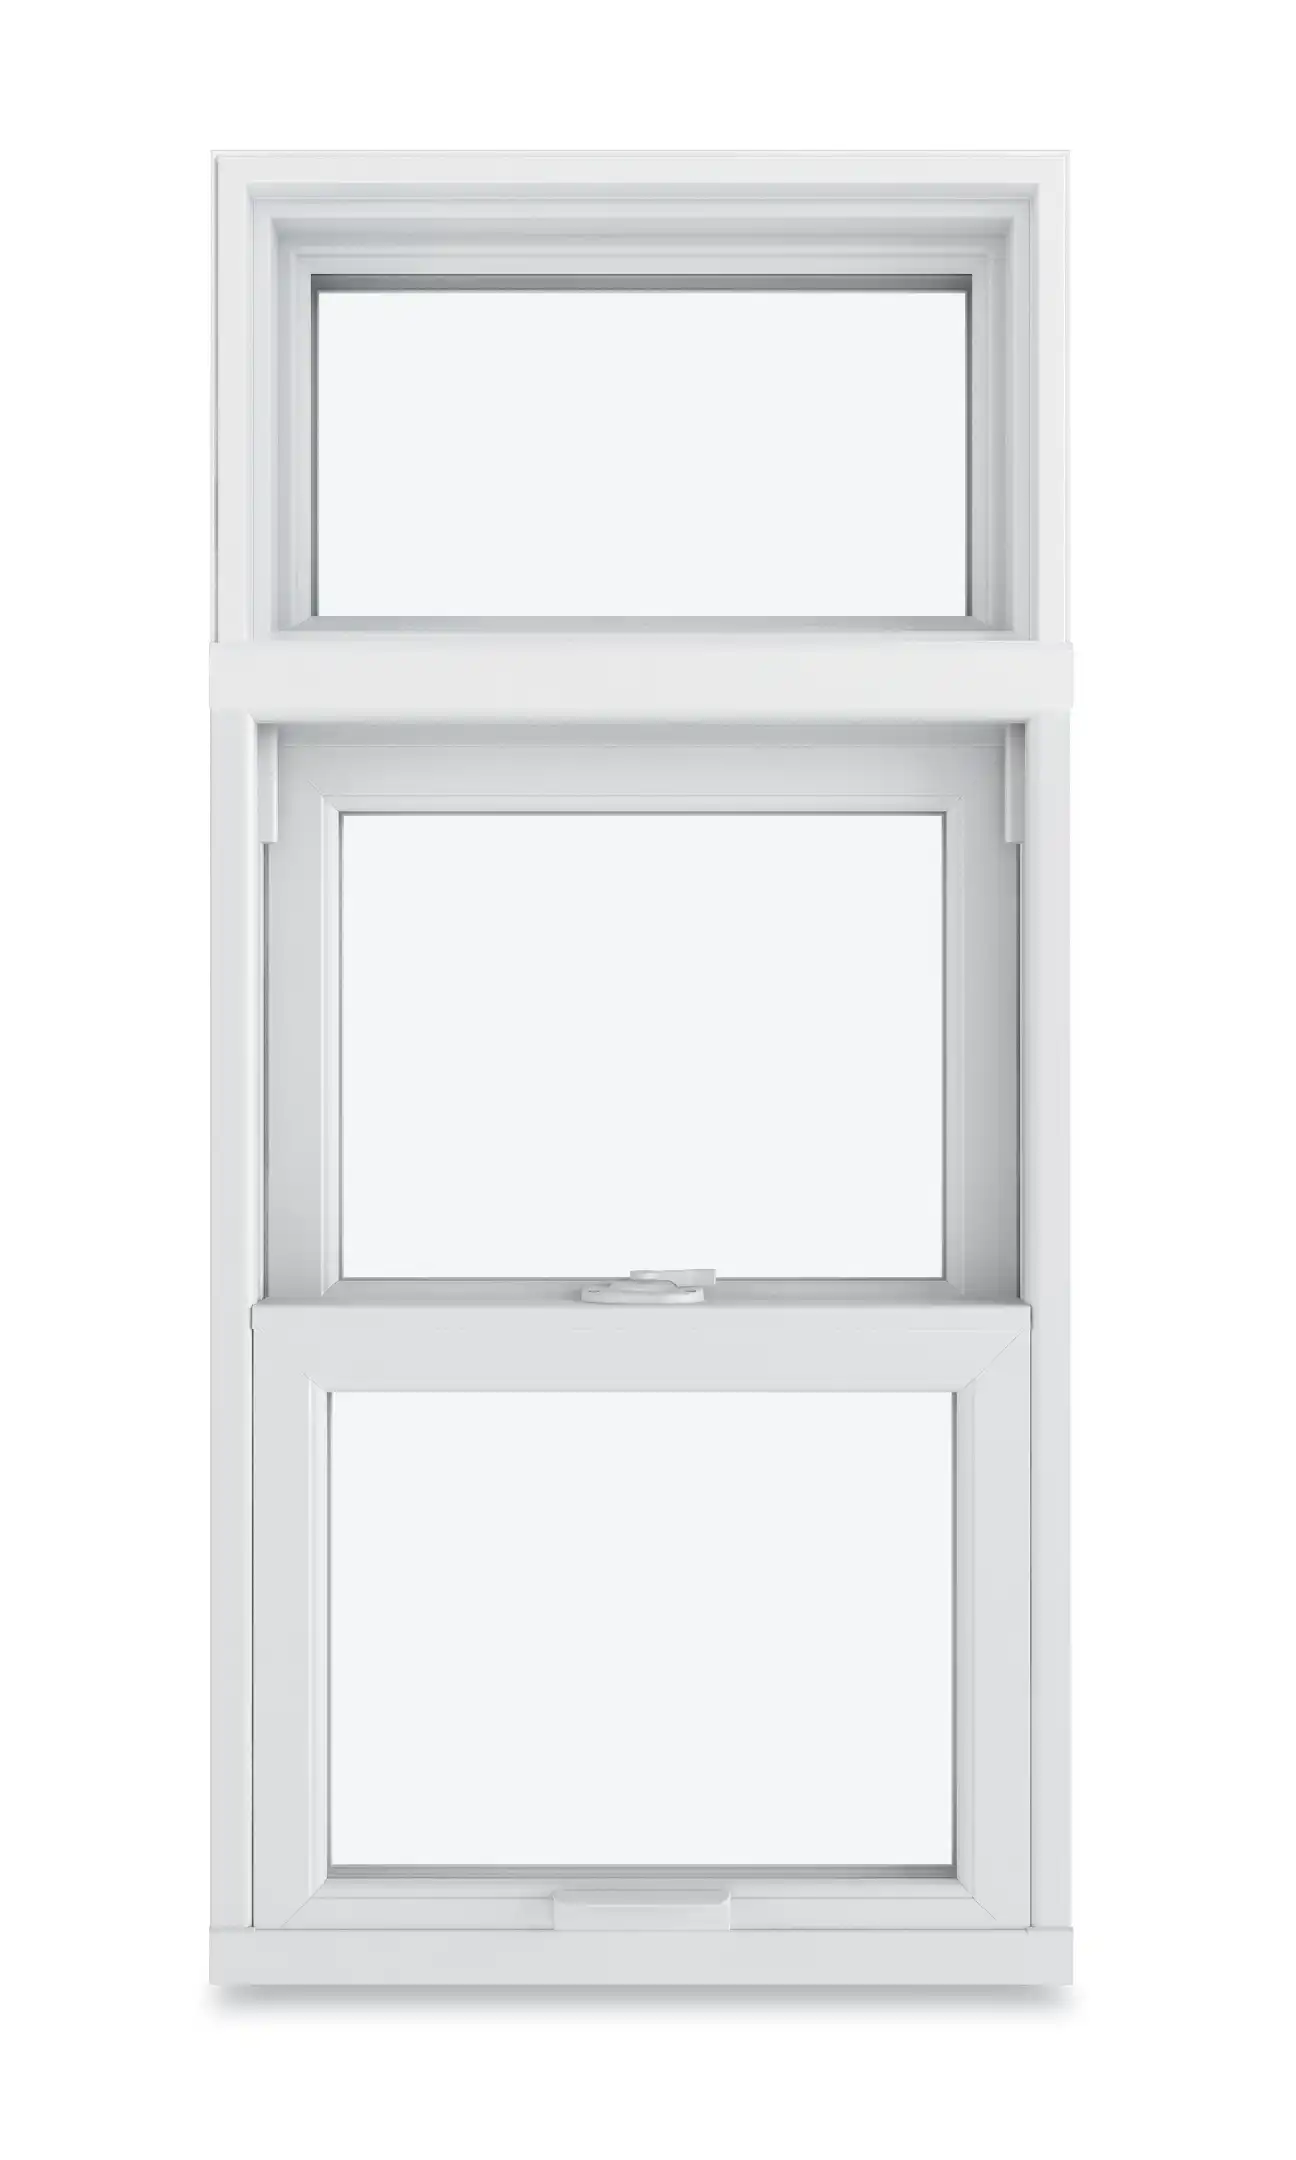 White Marvin Replacement Single Hung window with a Picture Mull style.